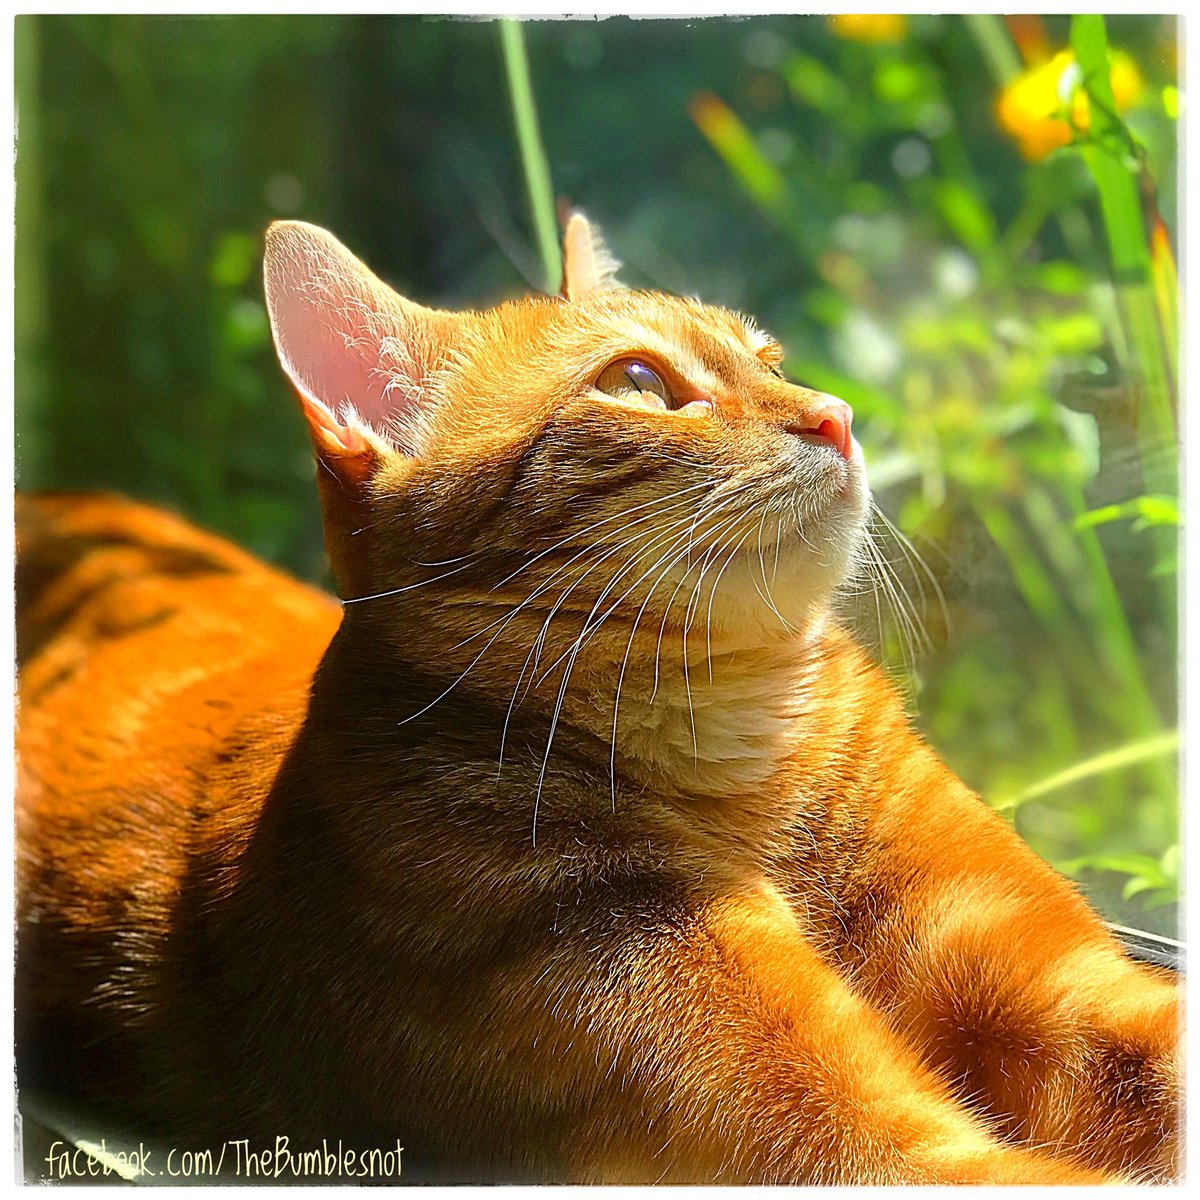 Even though things are tough right now, The Orange Kitty wants everyone to have as wonderful a day as he is.
😺🧡☀️
#sitinthesun #playinthesnow #watchtherainfall #petyourcat #hugyourdog #feedsomebirds #tellyourlovedonesyoulovethem #callafriend #readabook #watchanoldmovie #sing